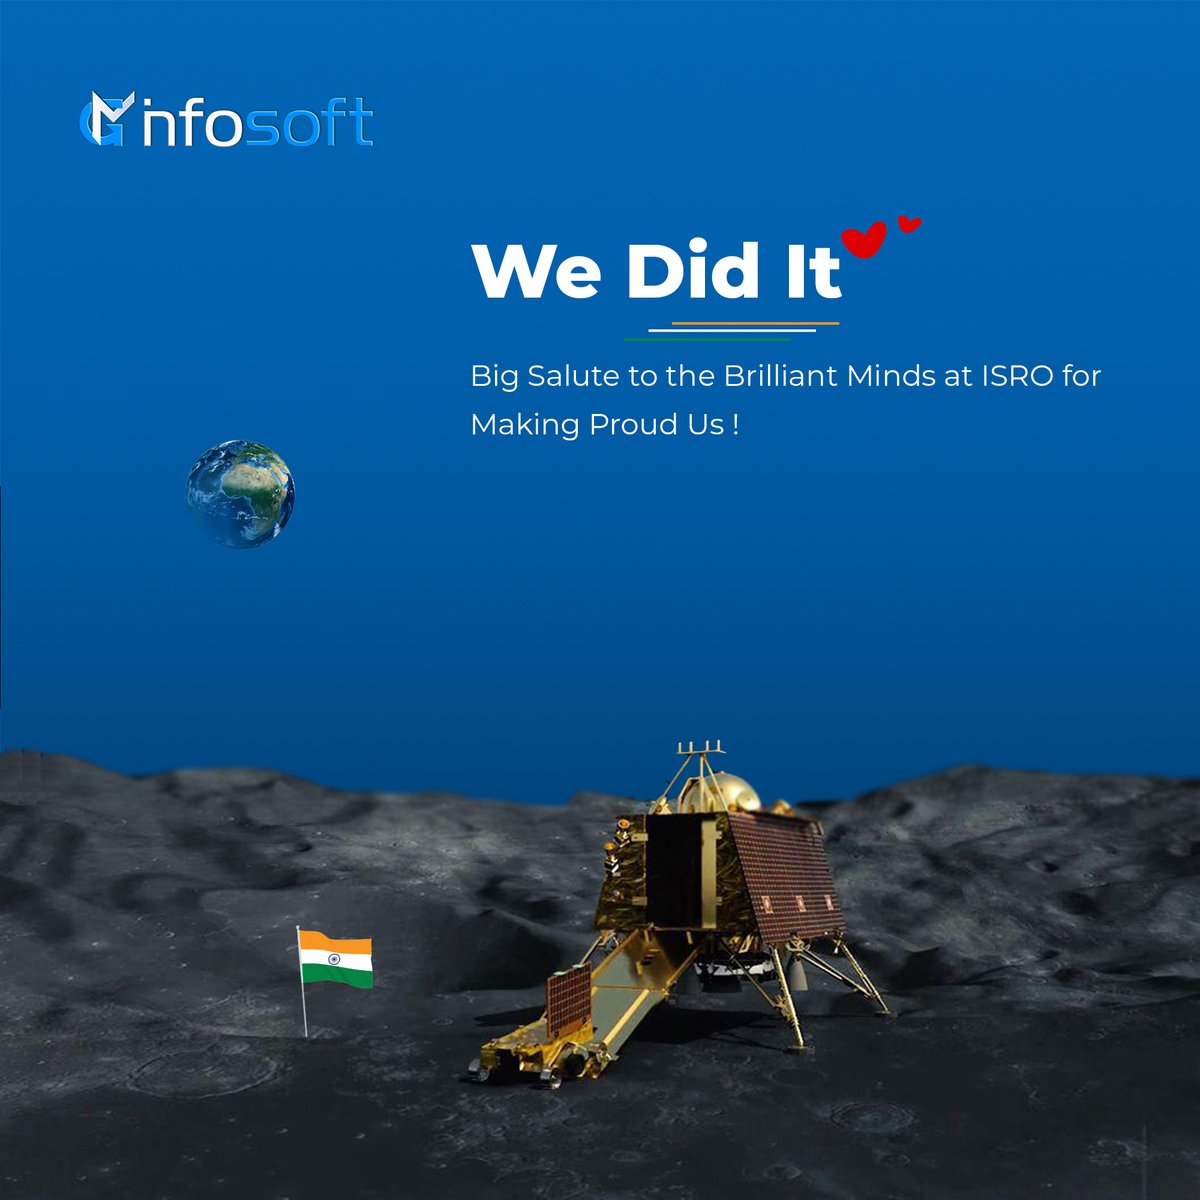 Proud Moment for India's Space Endeavours 🌌📷 Congratulations to @ISRO on the Incredible Triumph of Chandrayaan-3 Lunar Mission 
. 
. 
#Chandrayaan_3 #Chandrayaan #ISRO #IndiaOnMoon #VikramLander